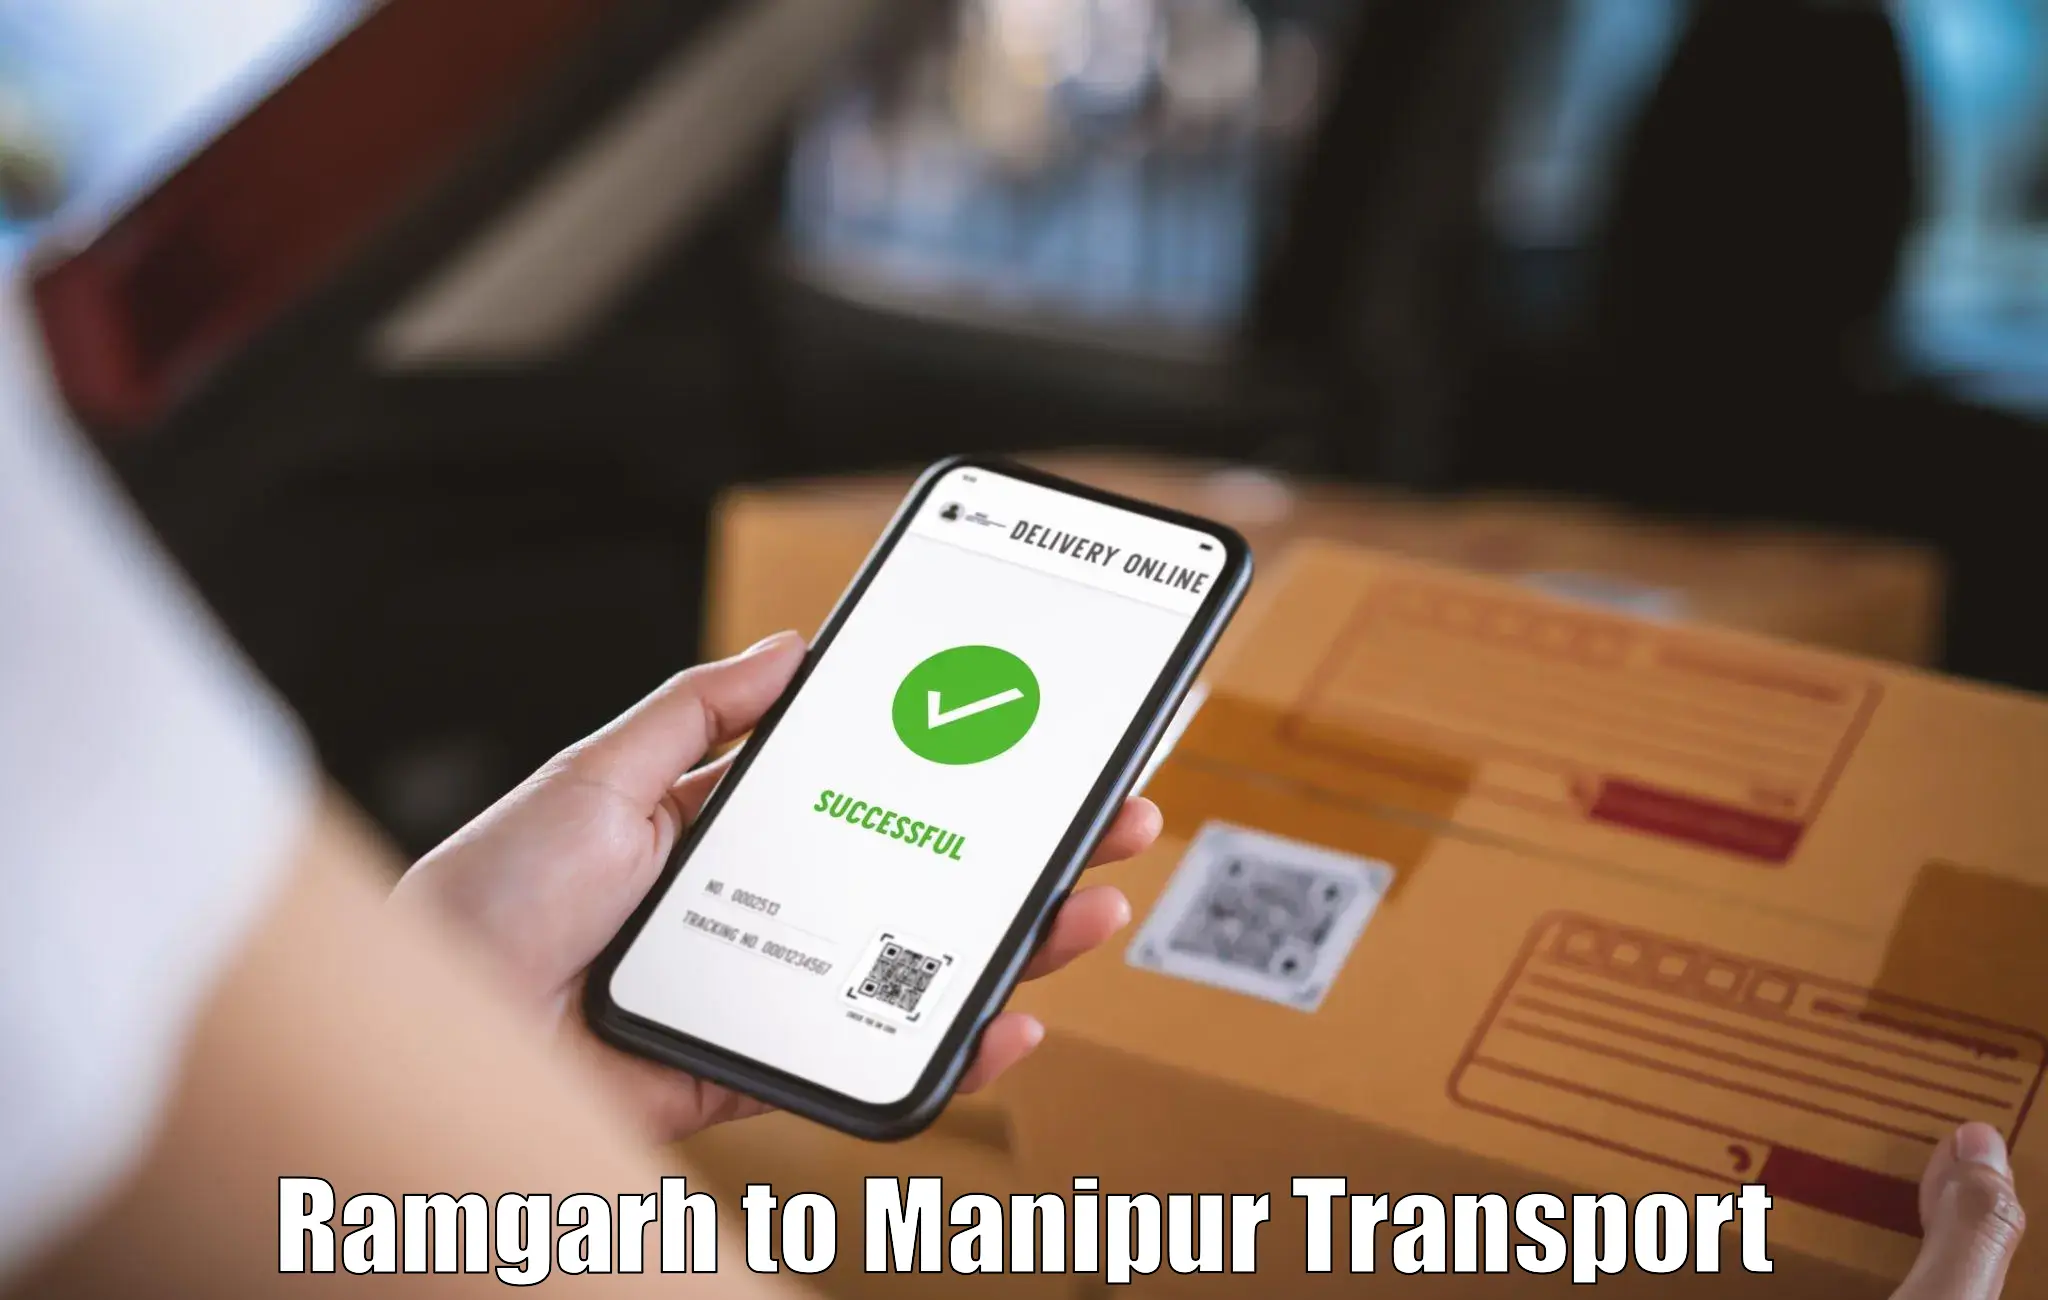 Domestic transport services Ramgarh to Manipur